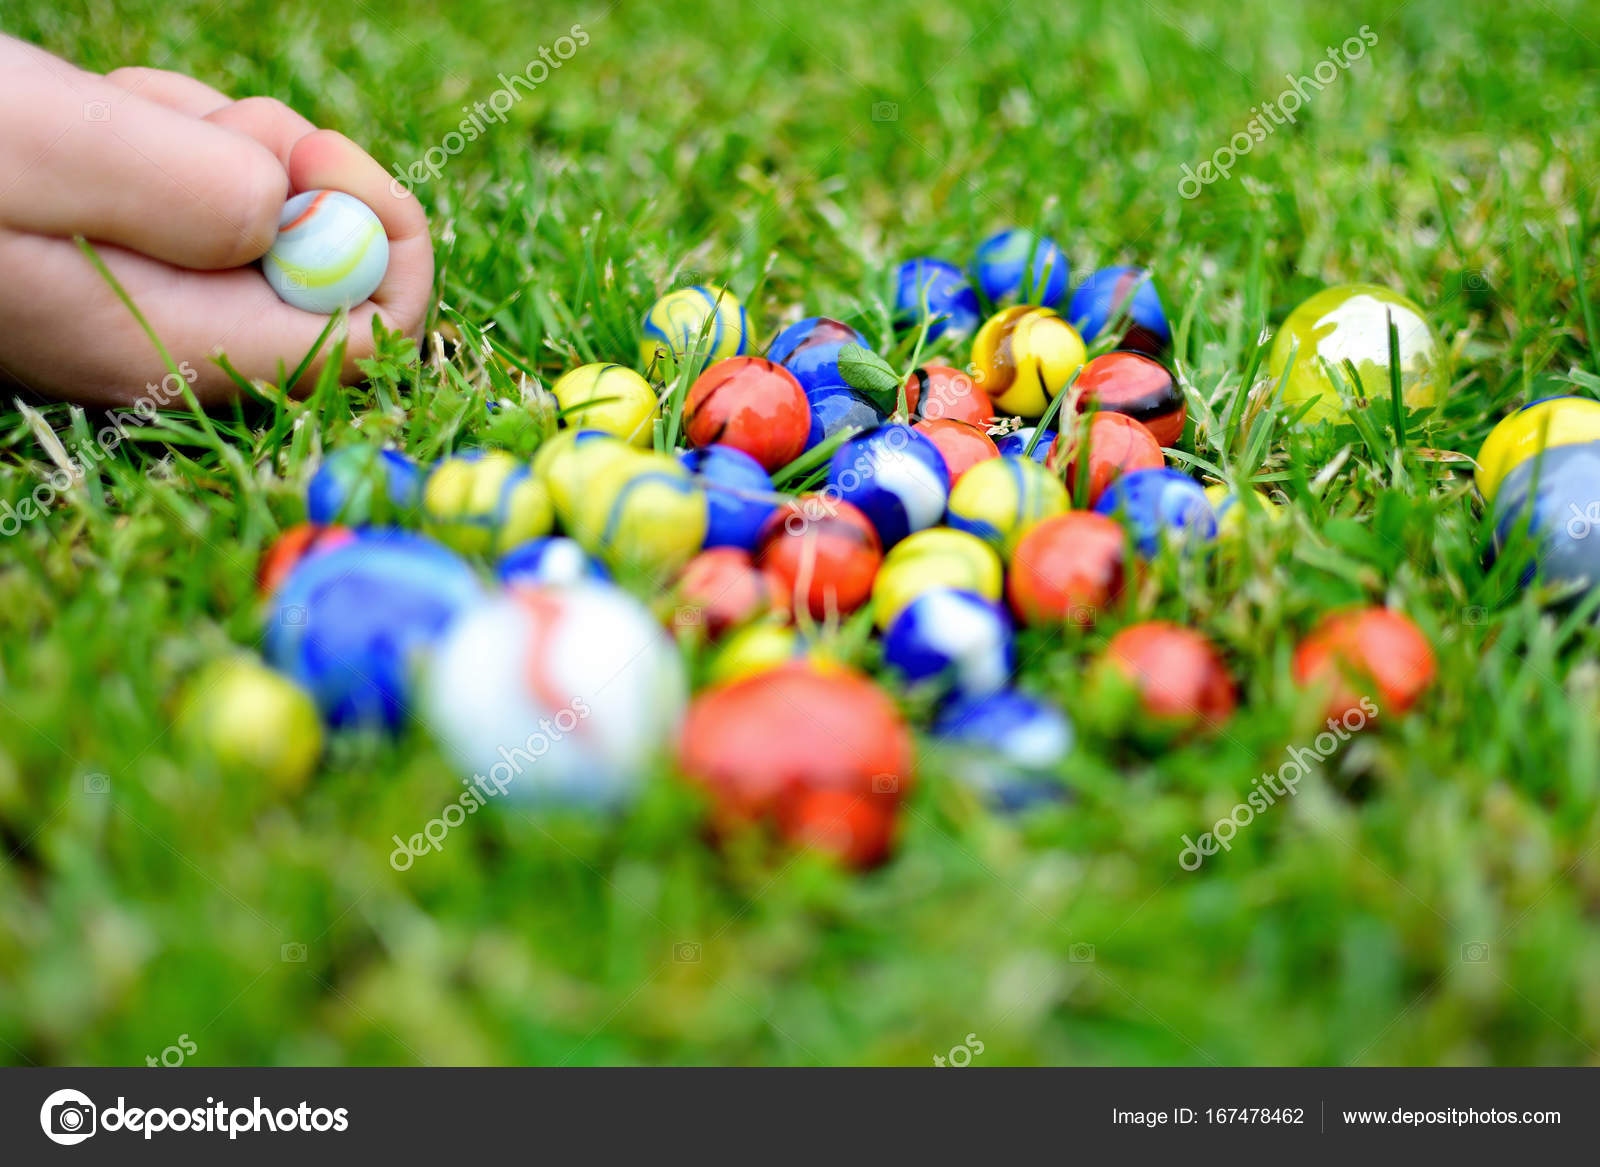 Playing With Marbles Stock Photo C Drobacphoto 167478462